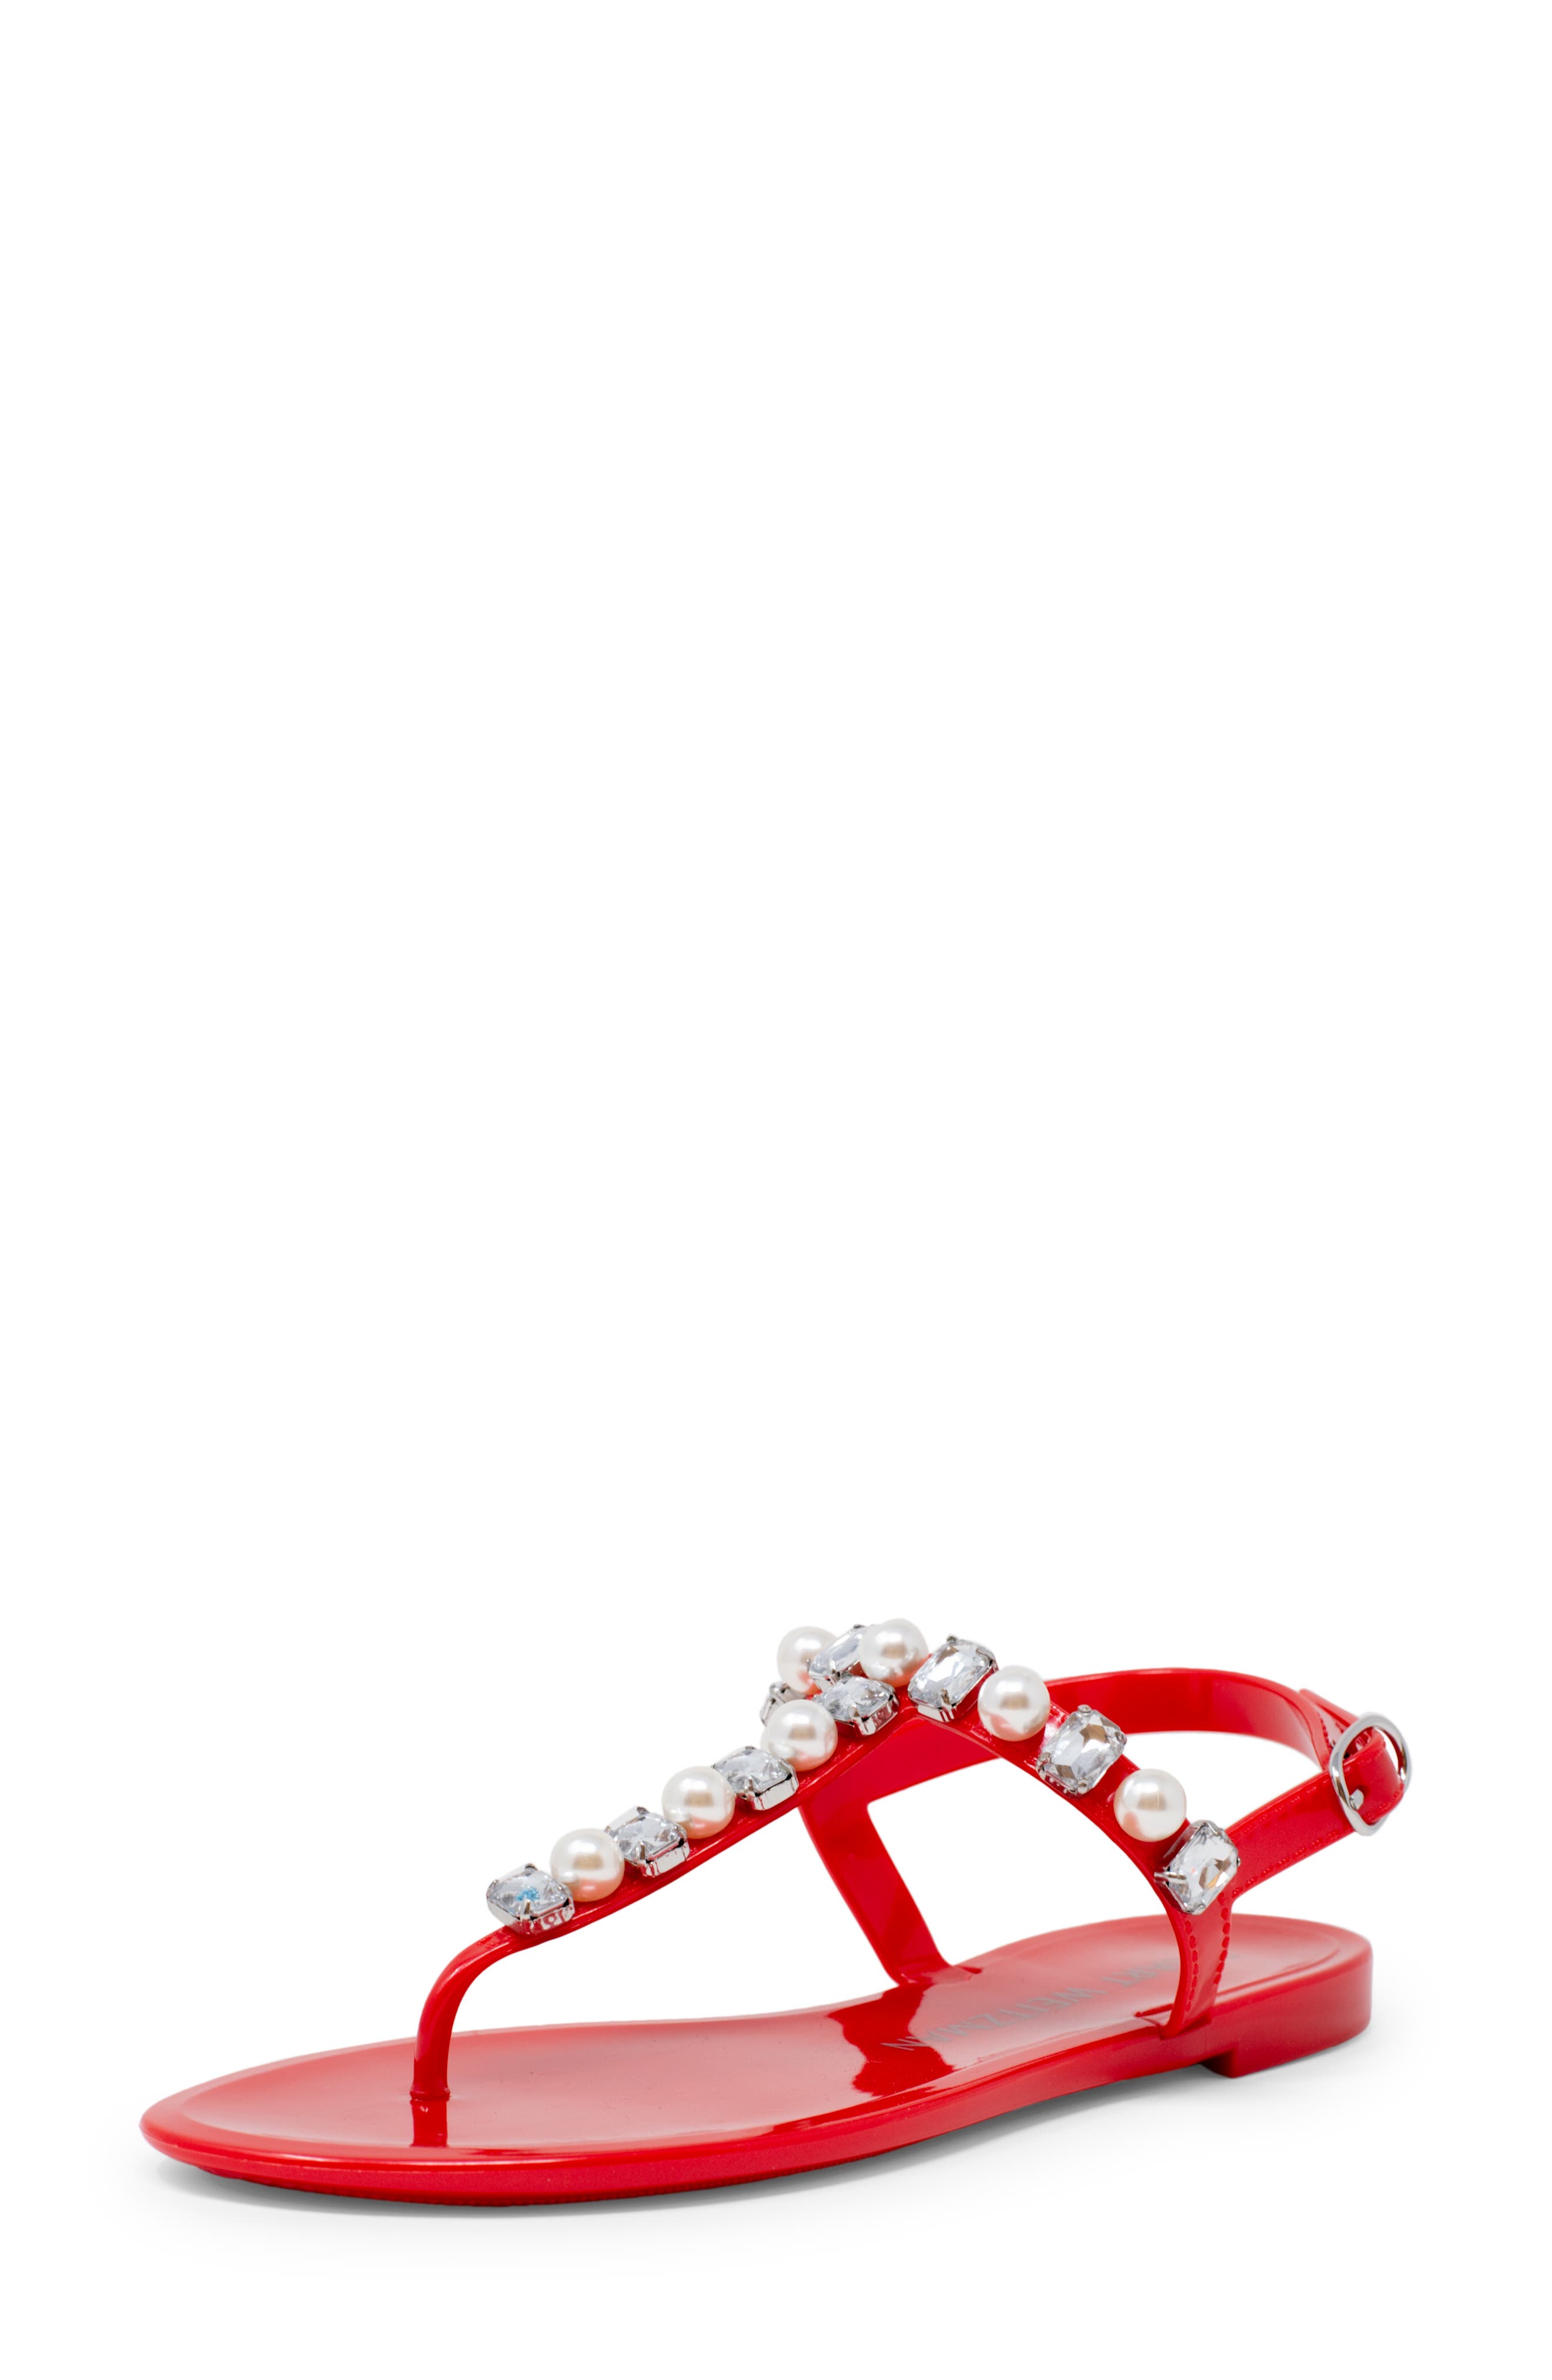 Stuart Weitzman Goldie Crystal Jelly Sandal in Coral at Nordstrom, Size 6